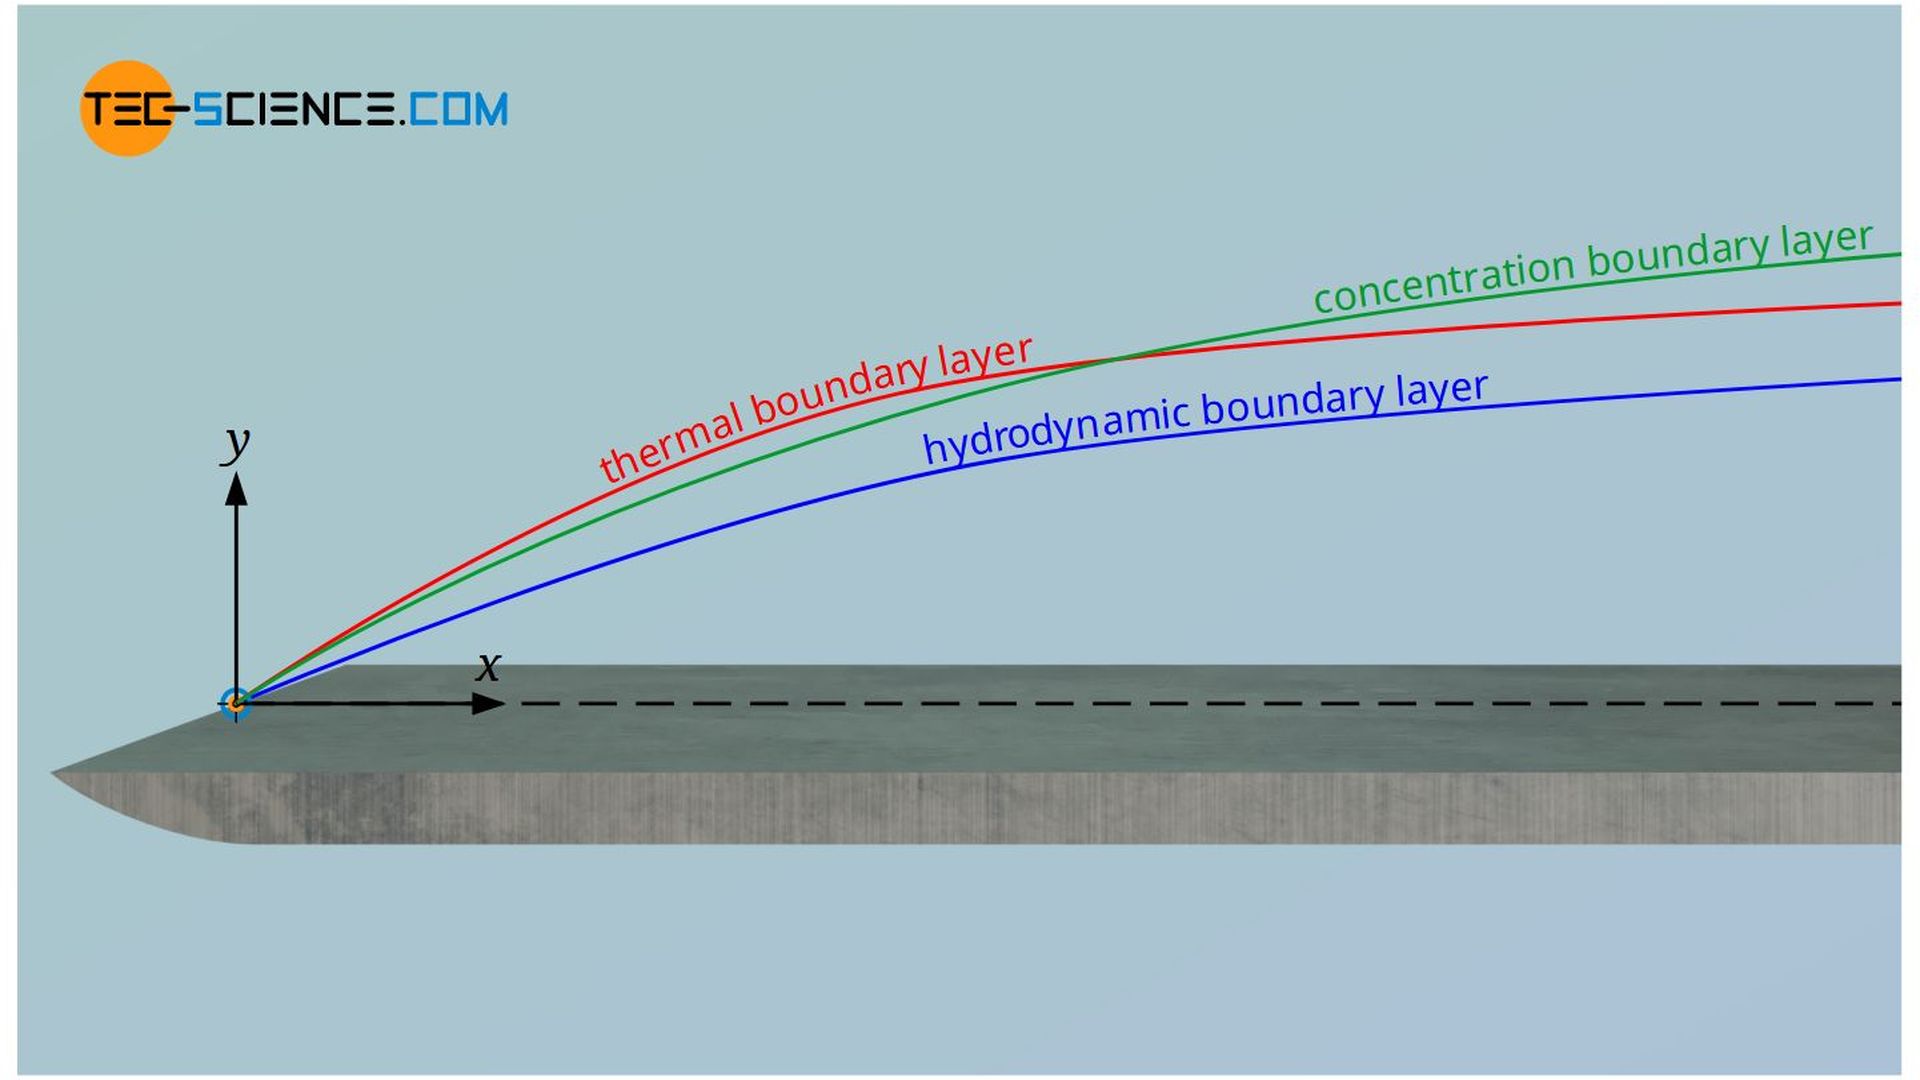 Hydrodynamic, thermal and concentration boundary layer